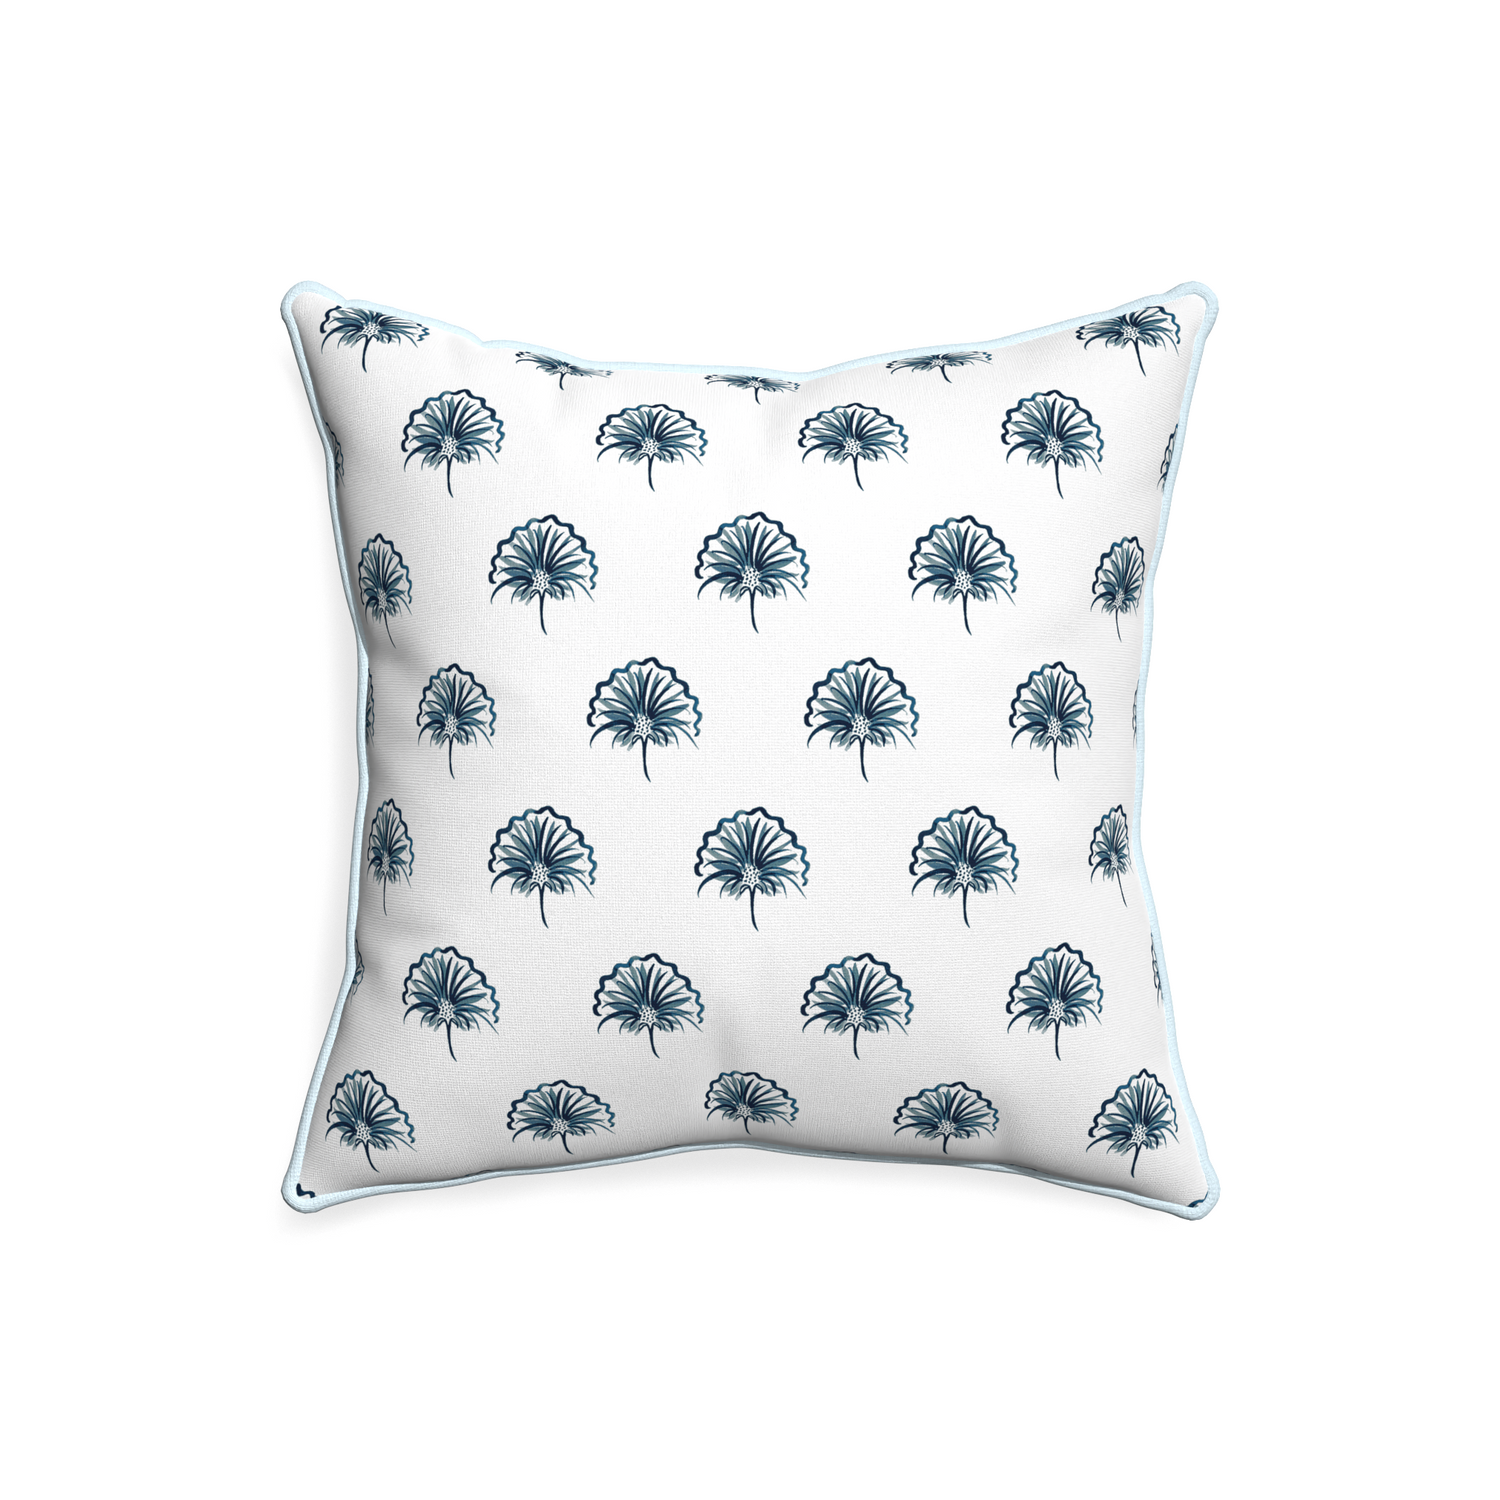 20-square penelope midnight custom floral navypillow with powder piping on white background